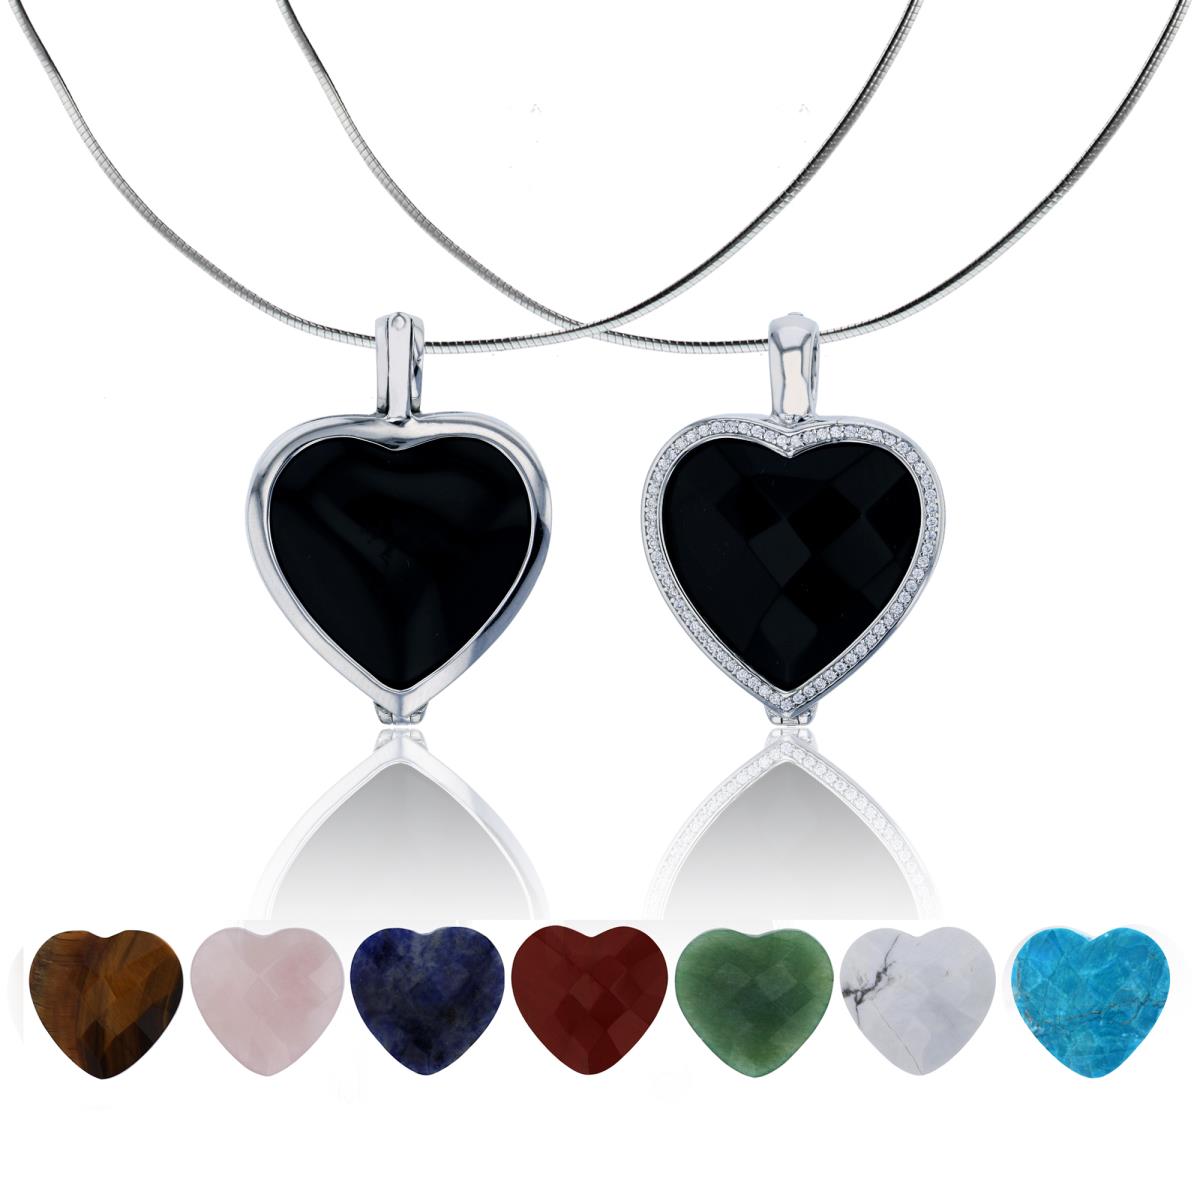 Sterling Silver Interchangeable 8 Semi-Precious Heart Gems(Polished and Faceted) with a Reversible CZ and Polished Pendant. 16"+2" Omega Chain Included